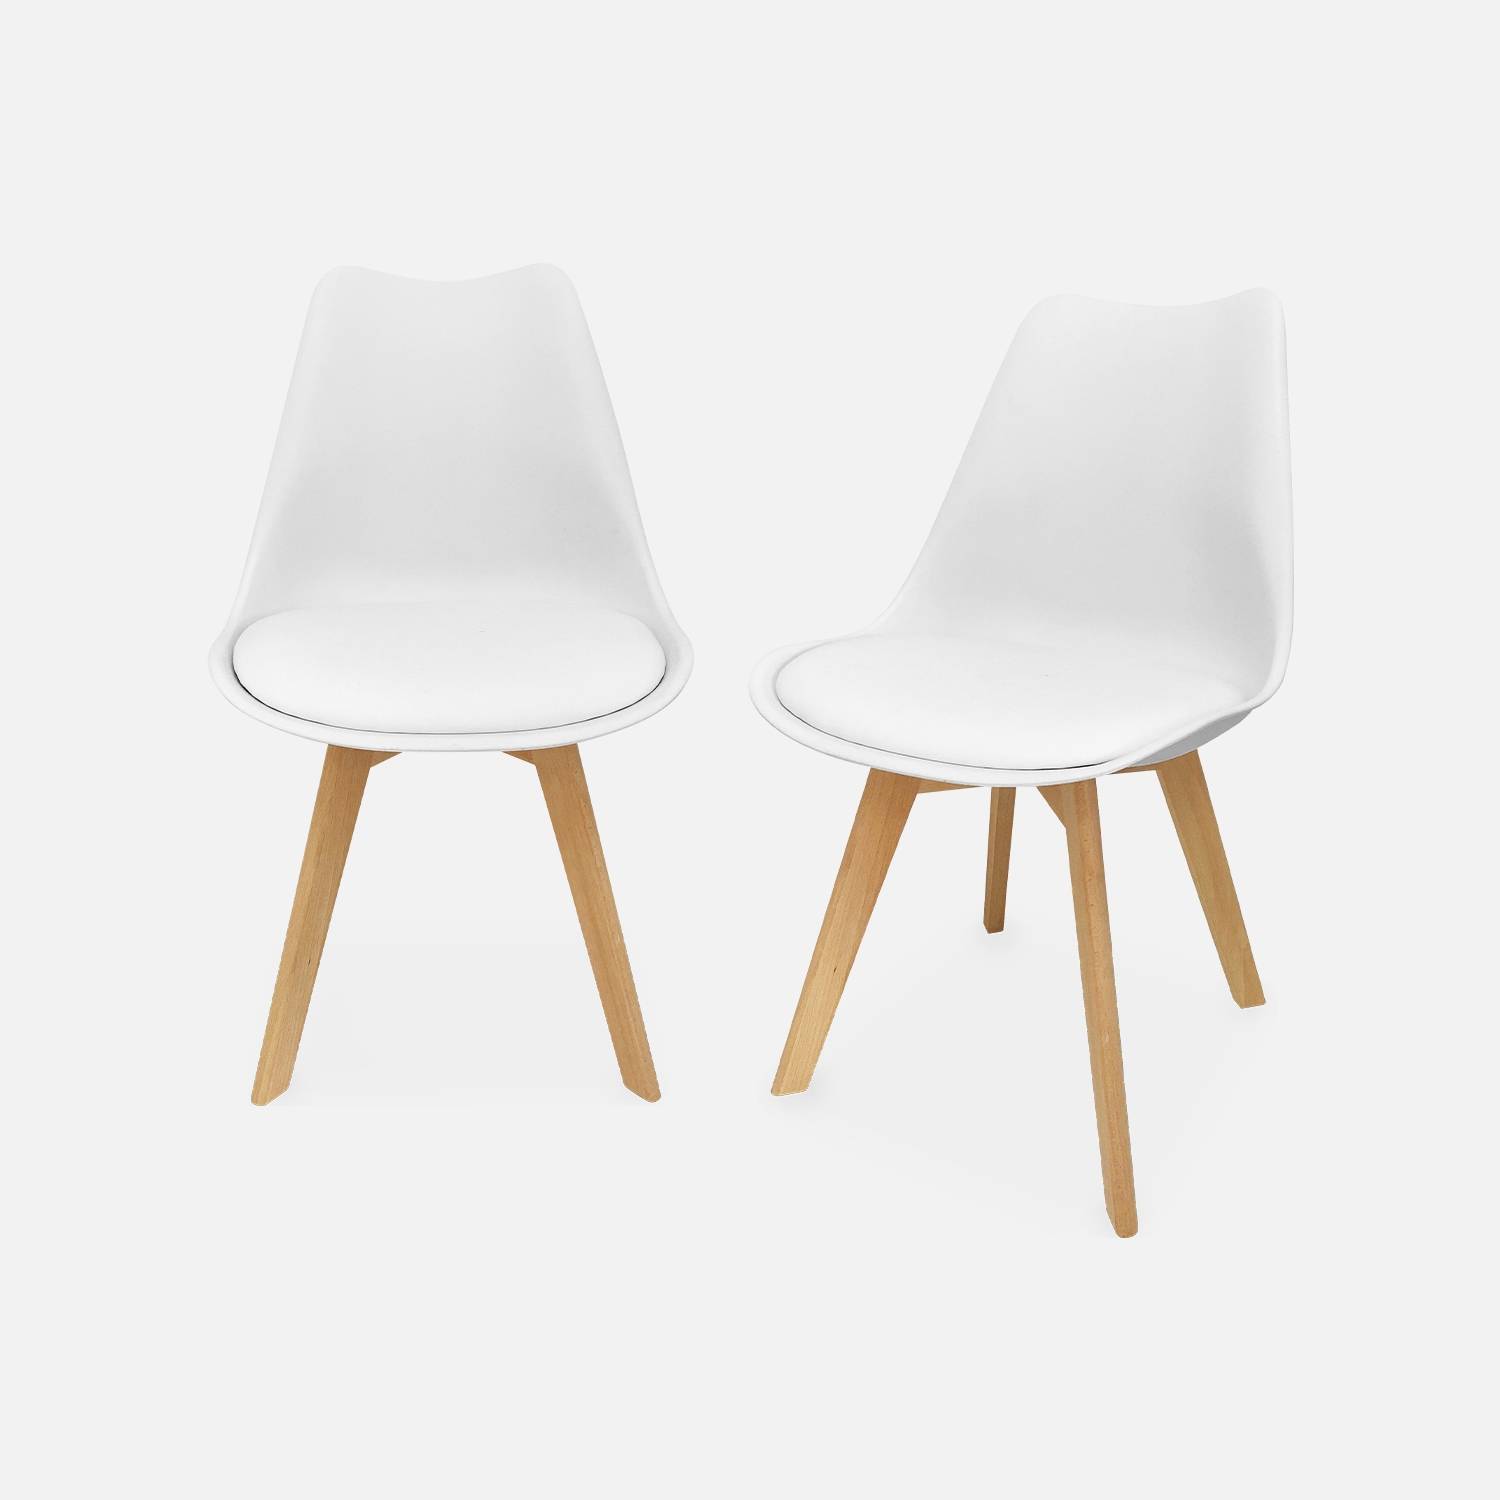 Pair of scandi-style dining chairs, white | sweeek